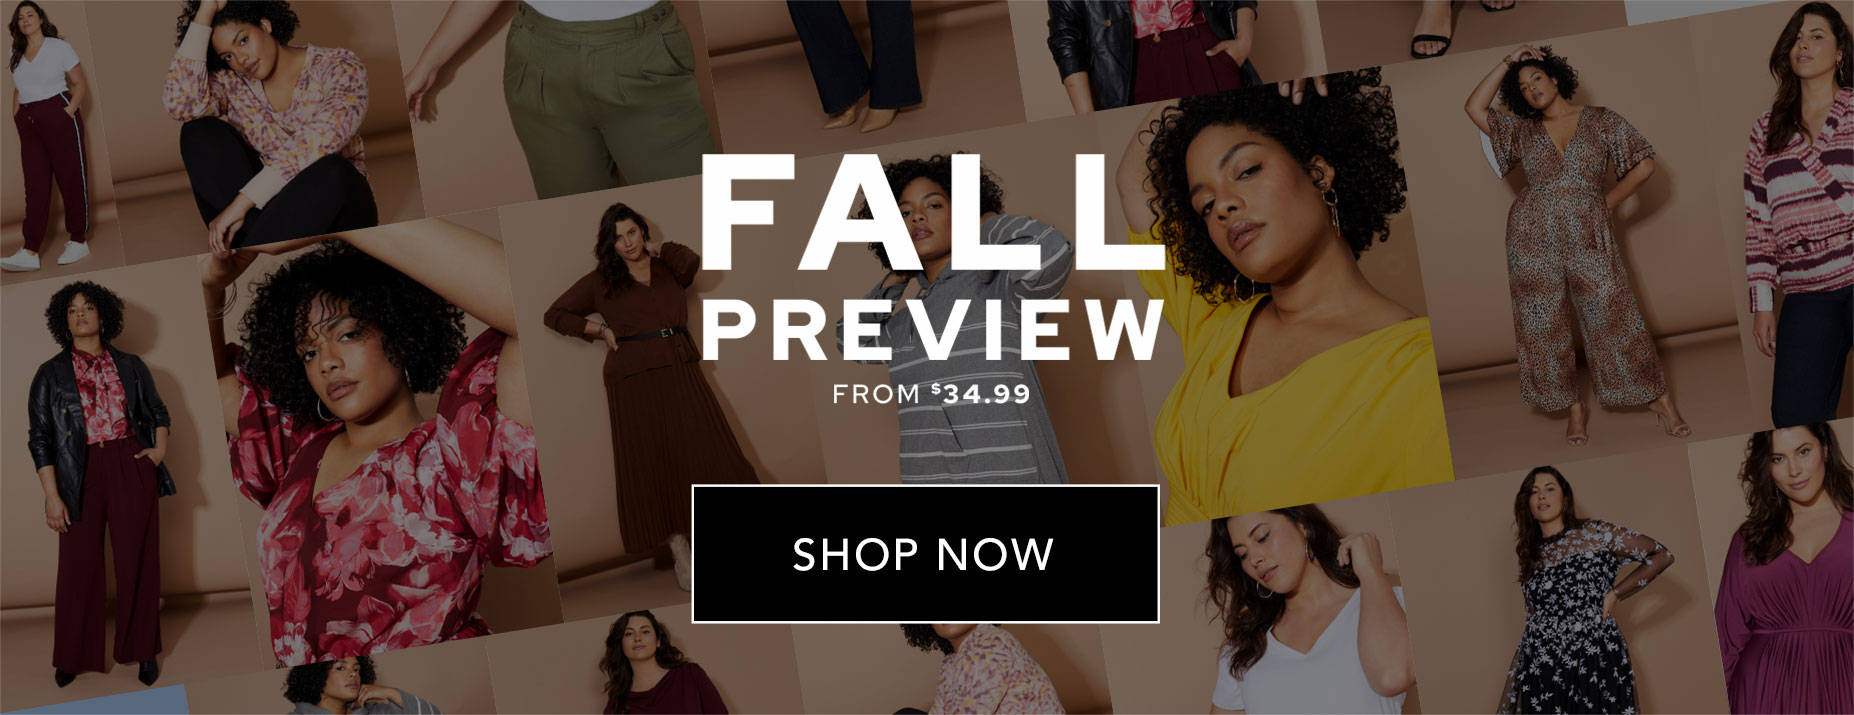 Fall preview form $34.99